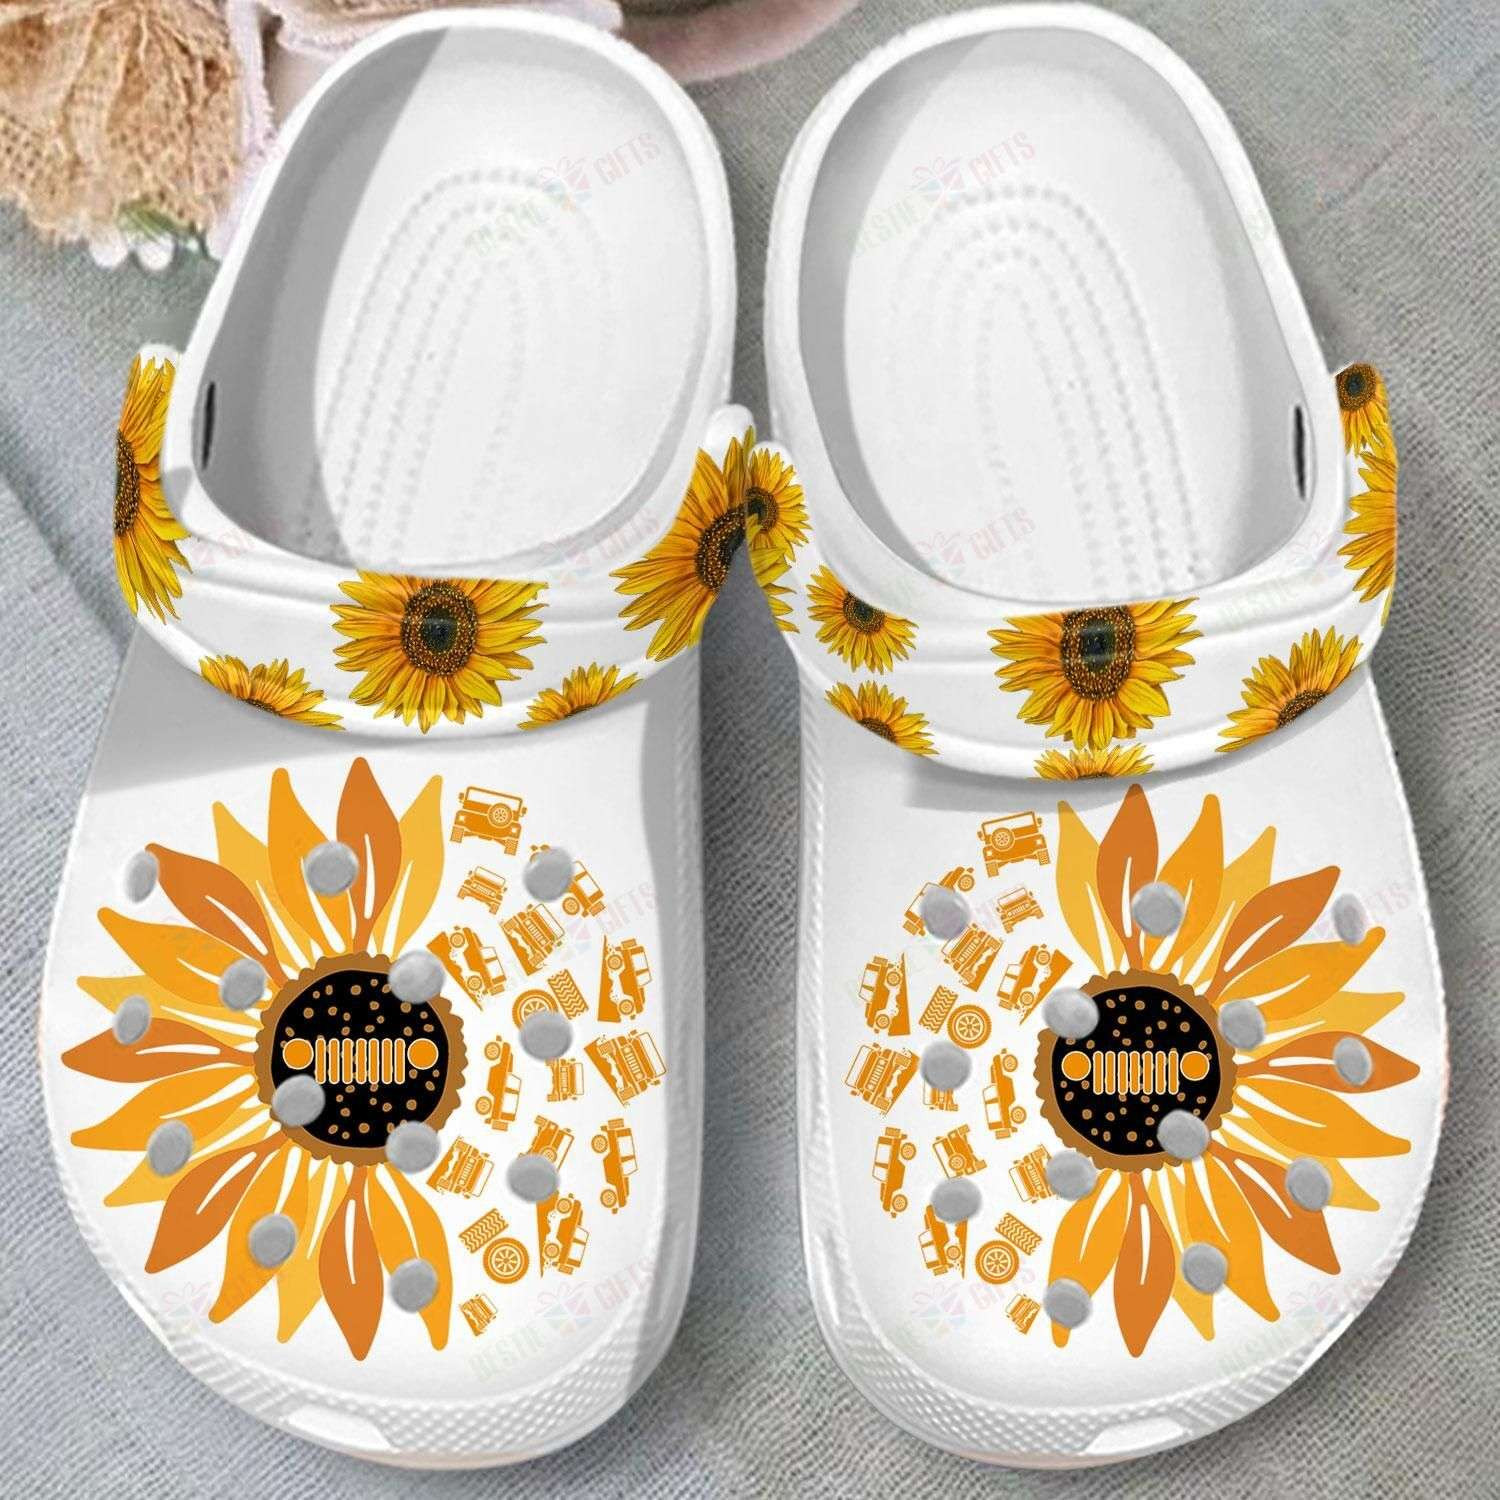 Jeep Sunflower Crocs Crocband Clog Shoes For Jeep Lover